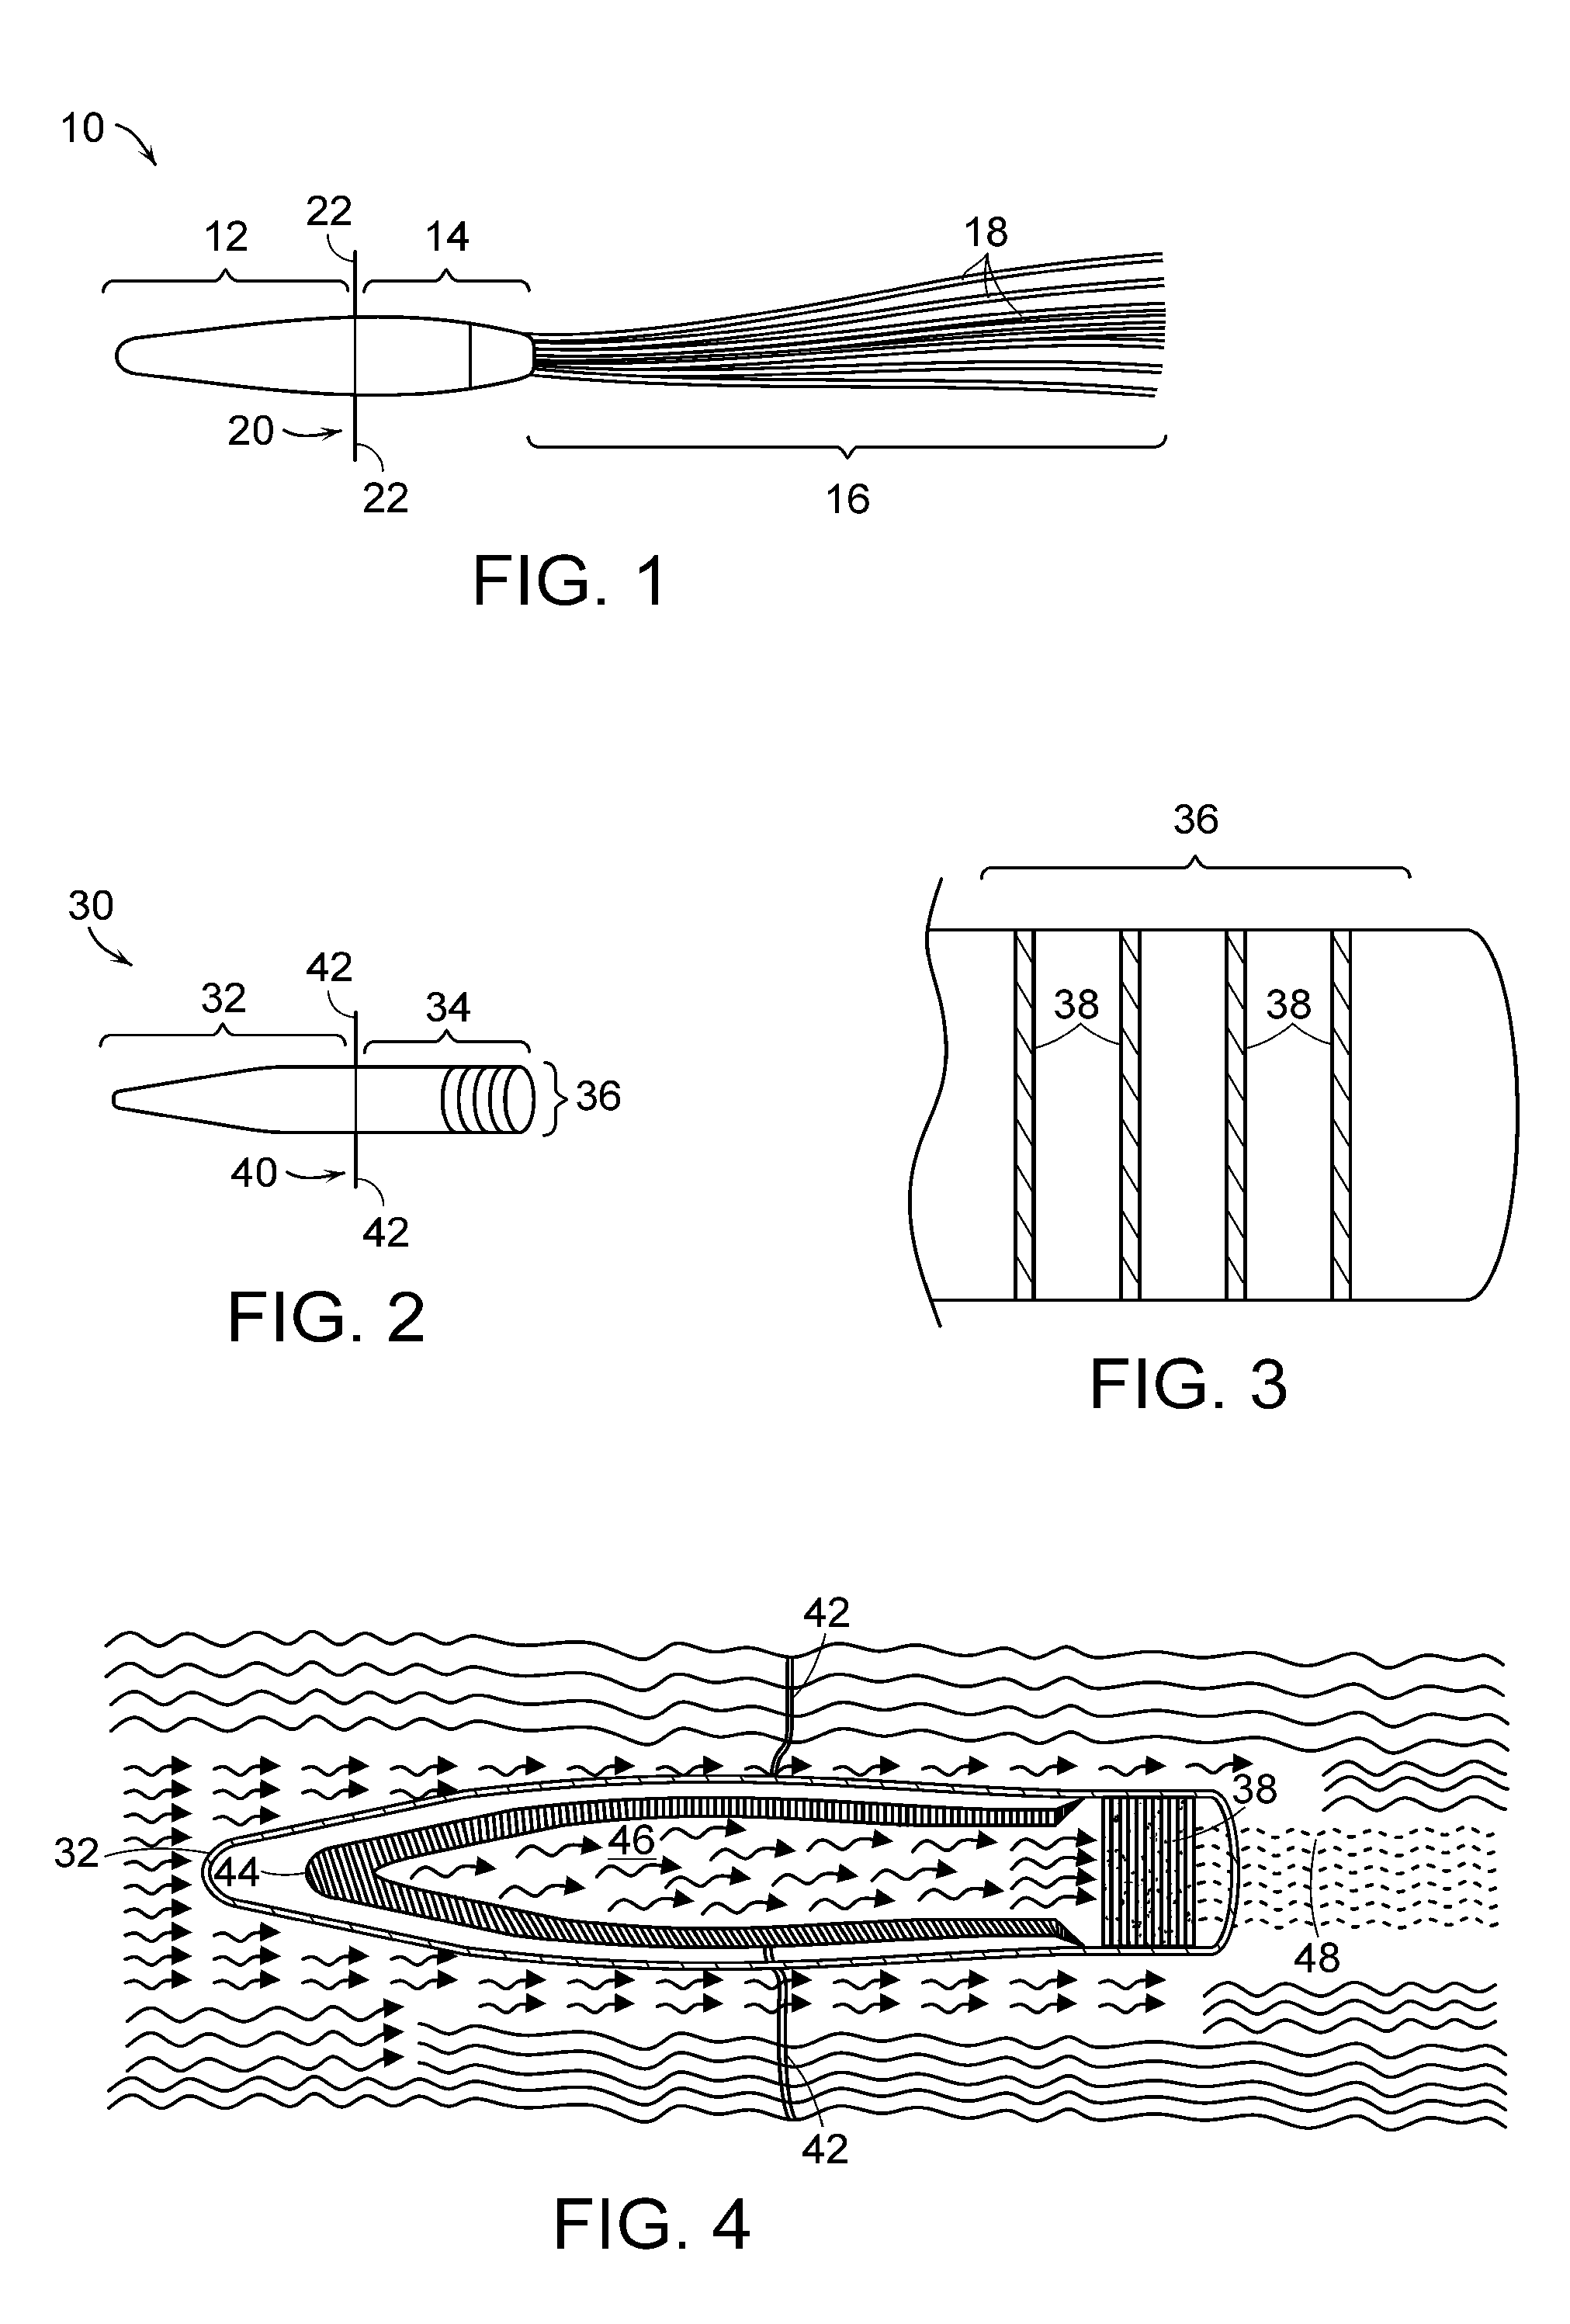 Extracorporeal cell-based therapeutic device and delivery system